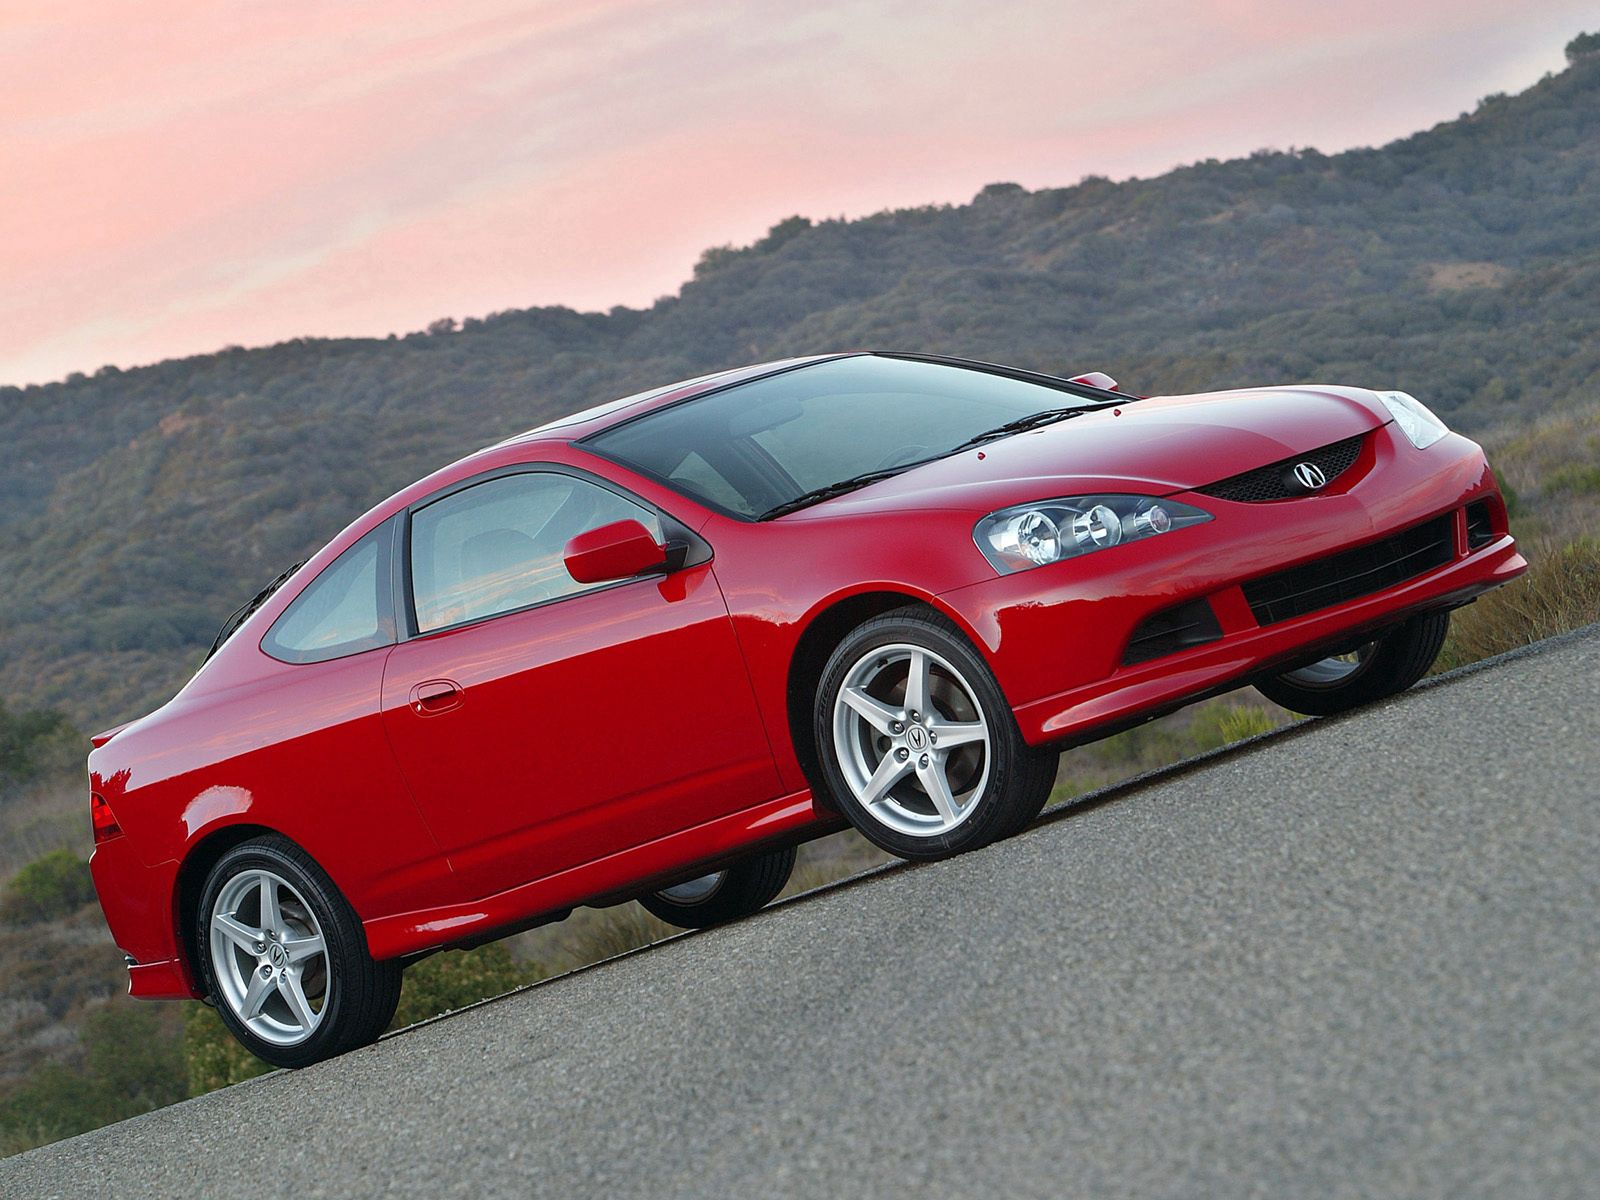 red, auto, nature, mountains, acura, cars, asphalt, side view, style, rsx, 2006